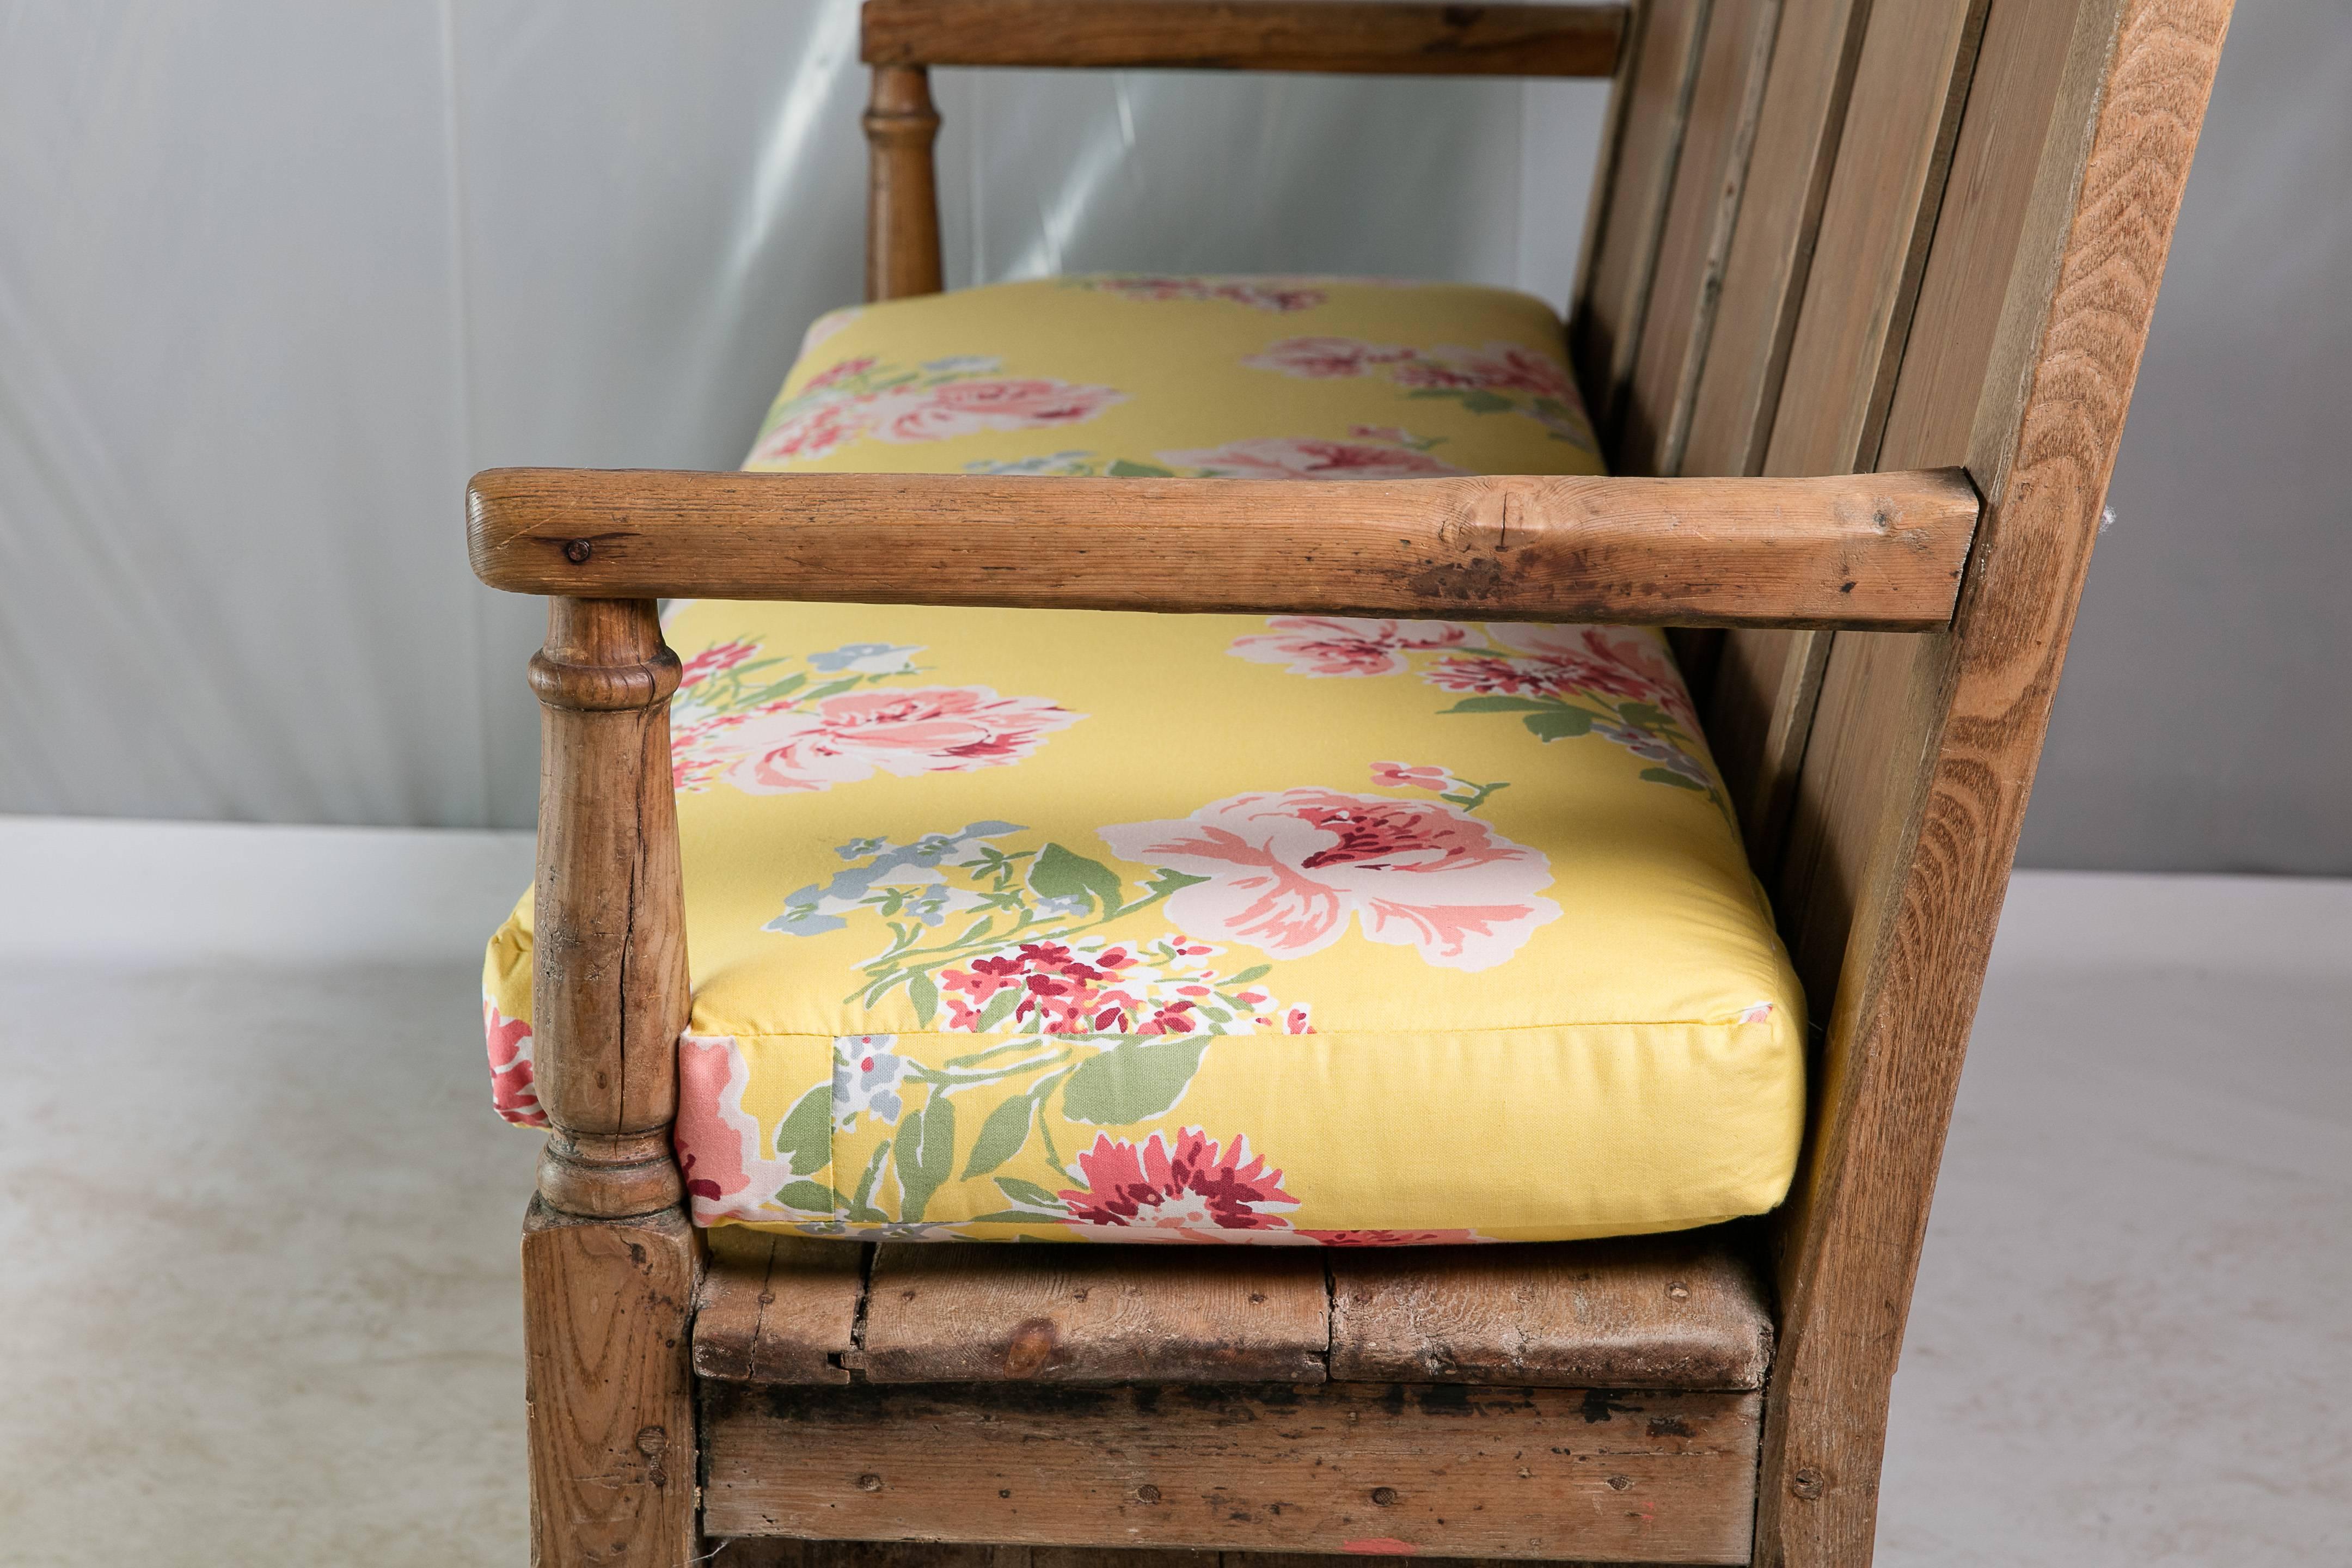 British Pine Bench with Floral Cushion, 19th Century English  For Sale